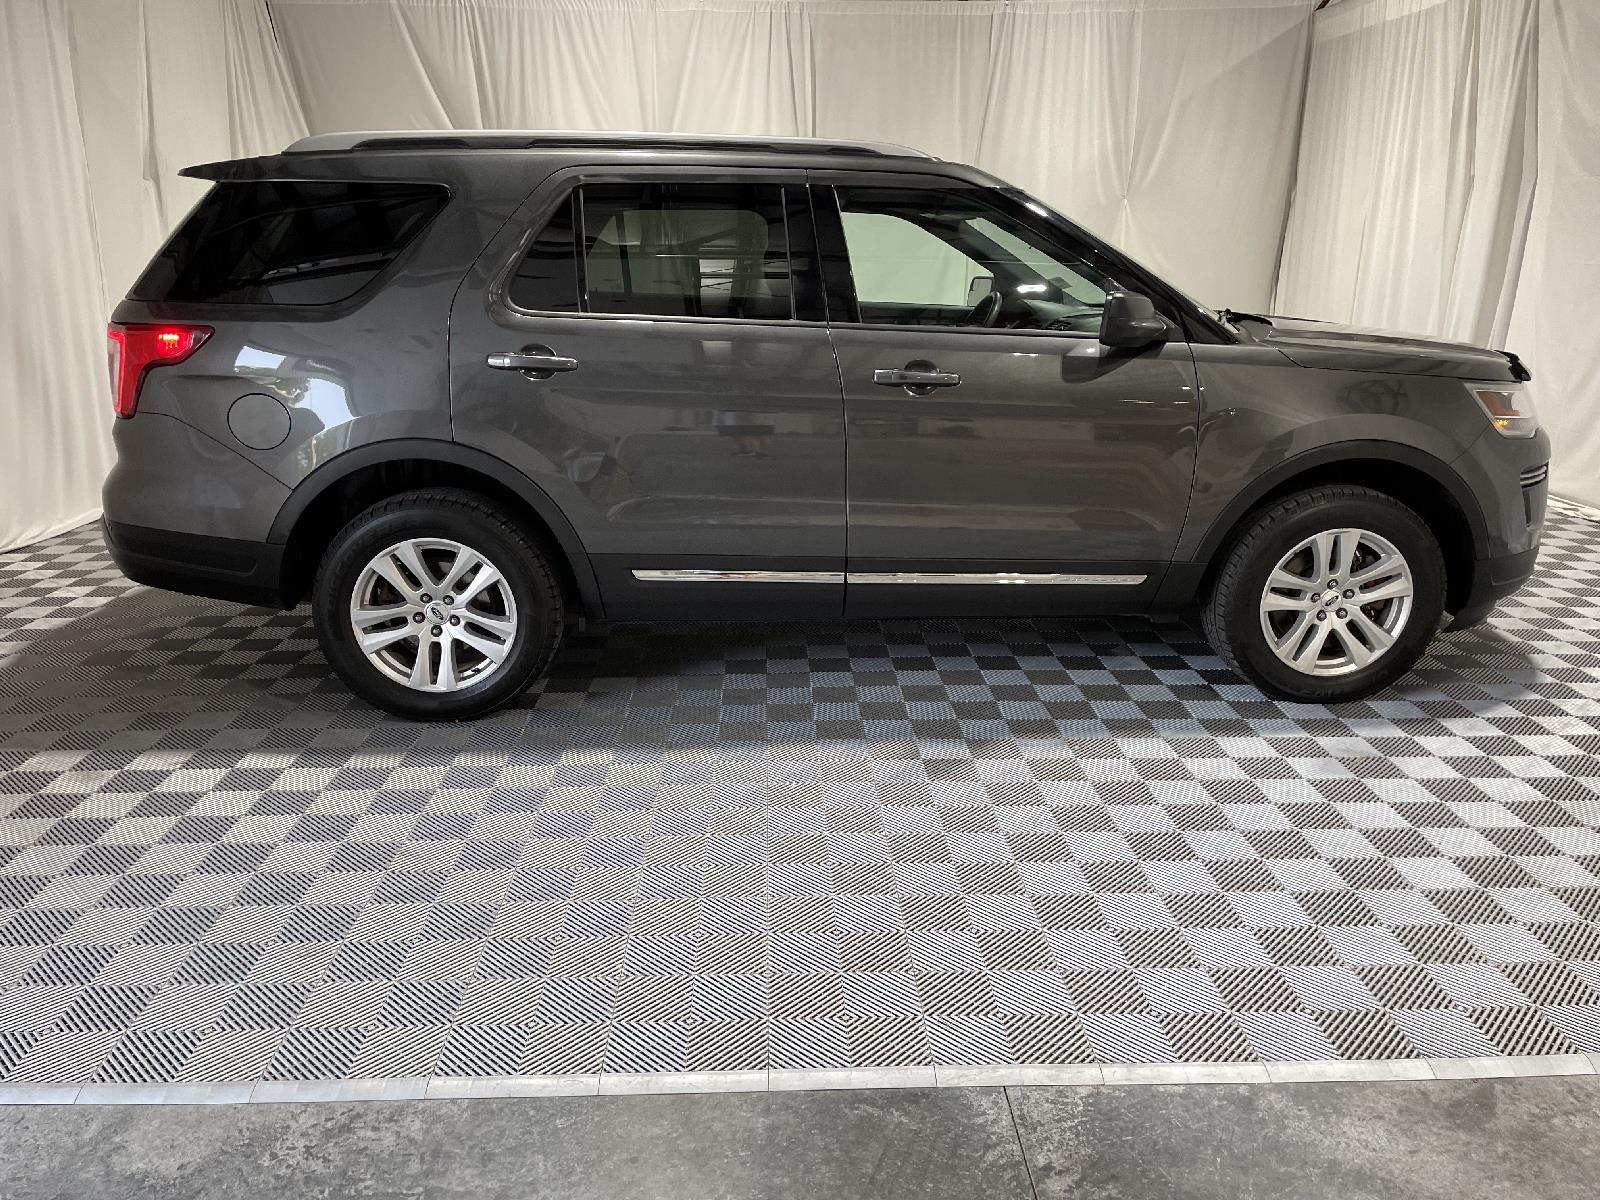 Used 2019 Ford Explorer XLT SUV for sale in St Joseph MO